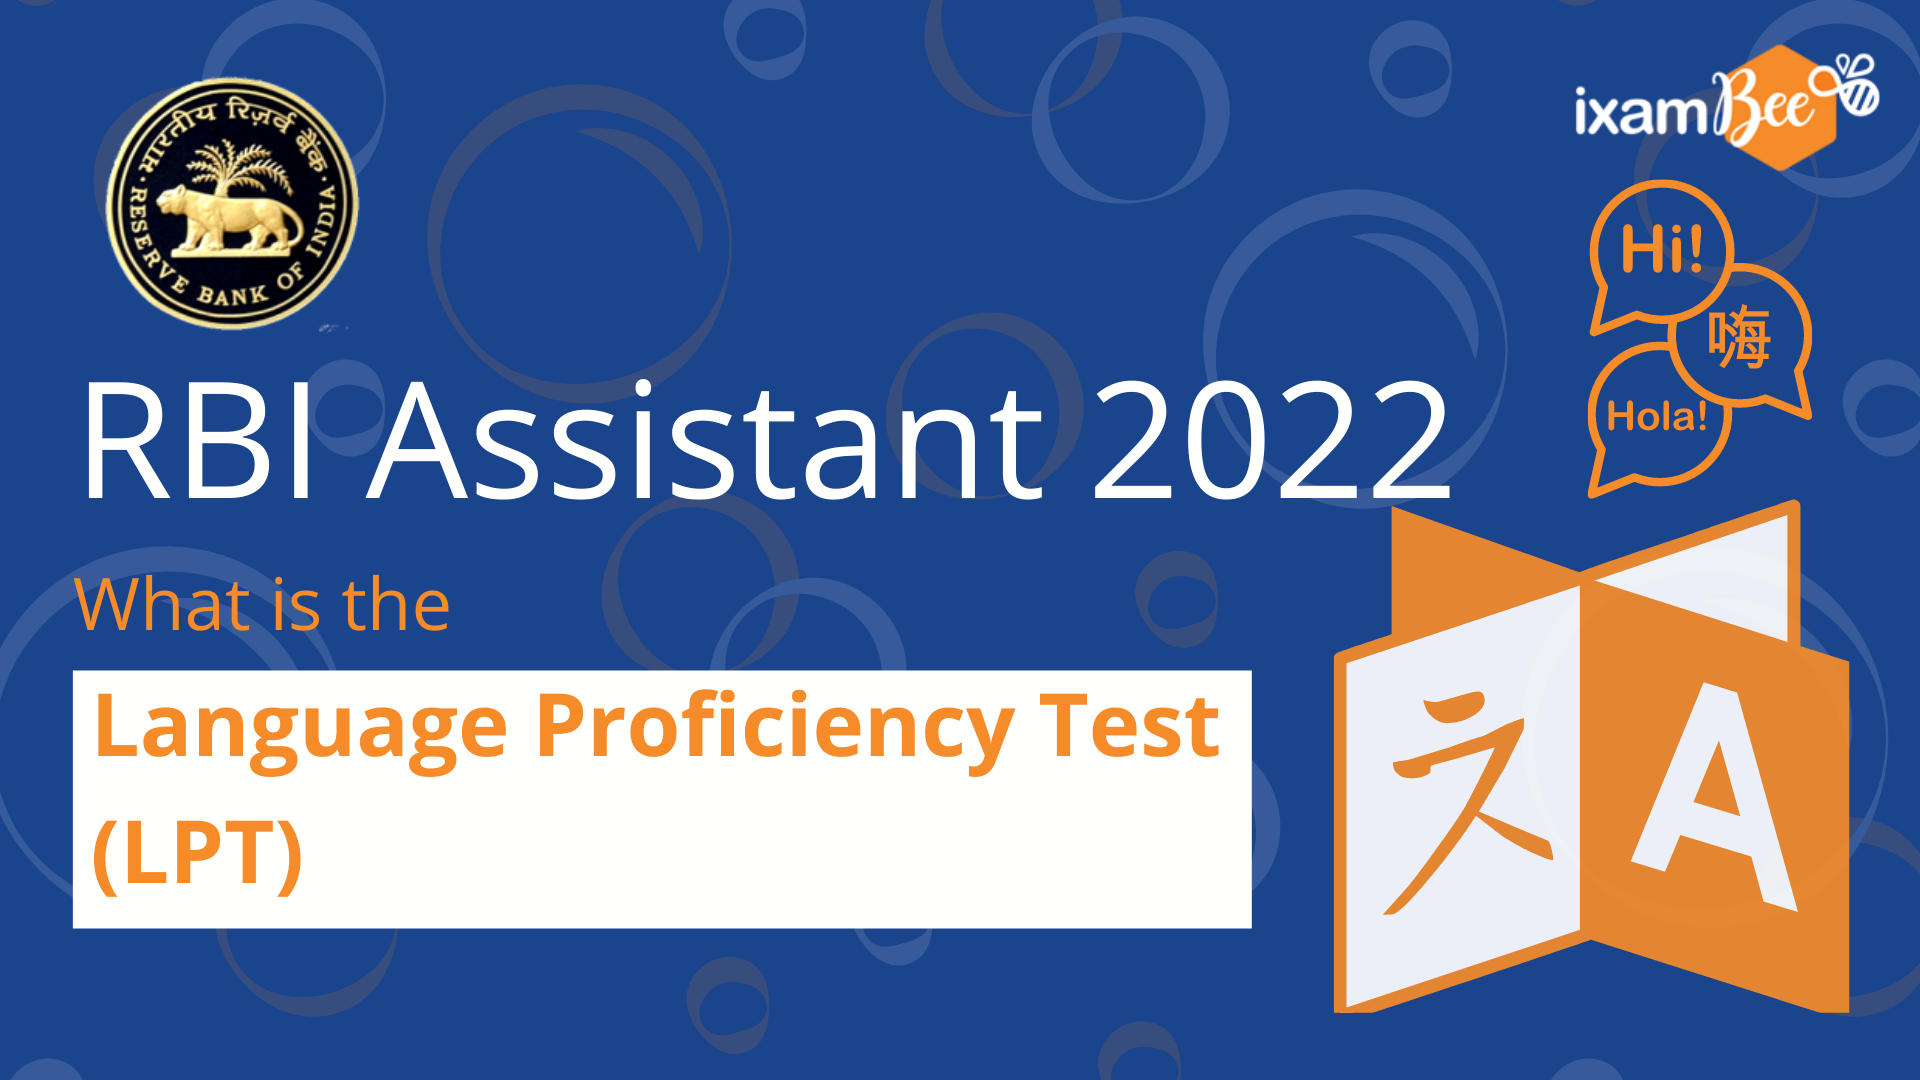 RBI Assistant Recruitment 2022: What is the Language Proficiency Test?